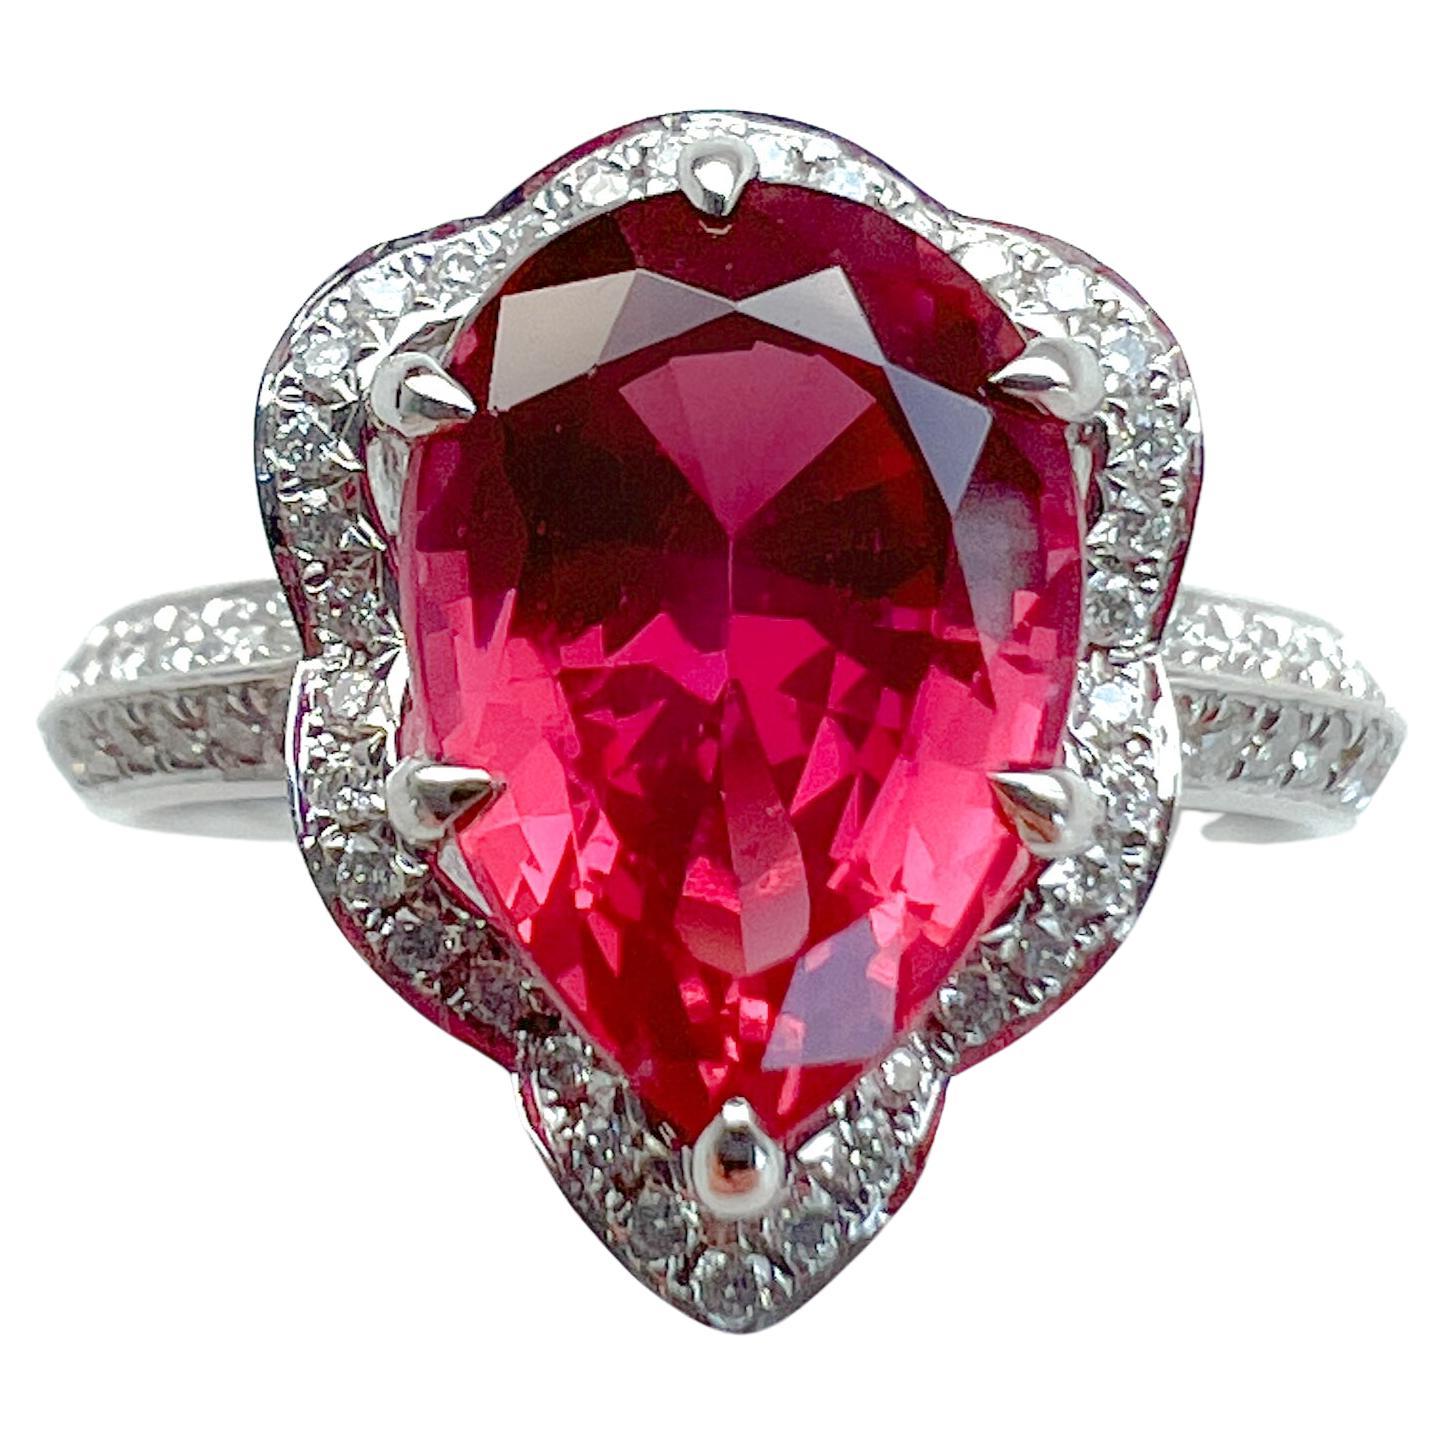 GIA Certified 3.09ct Red Spinel Cocktail Ring Ornate Halo For Sale